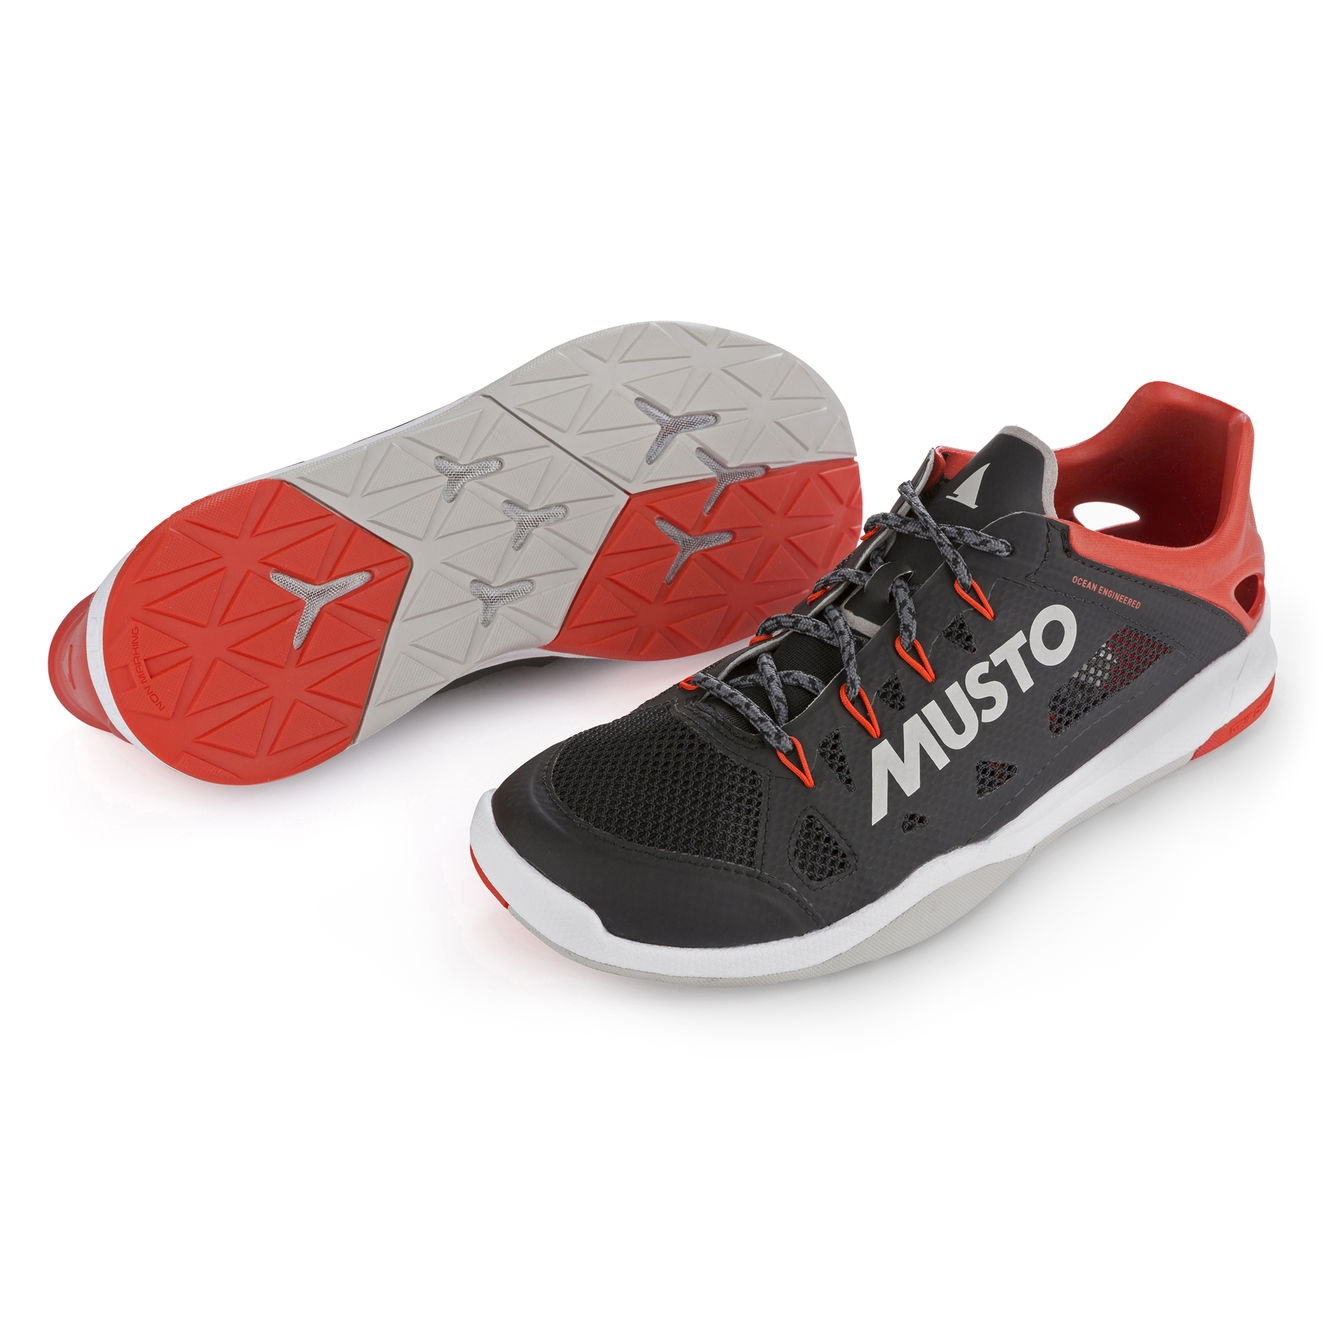 Dynamic Pro Lite Musto Sailing Shoes Review